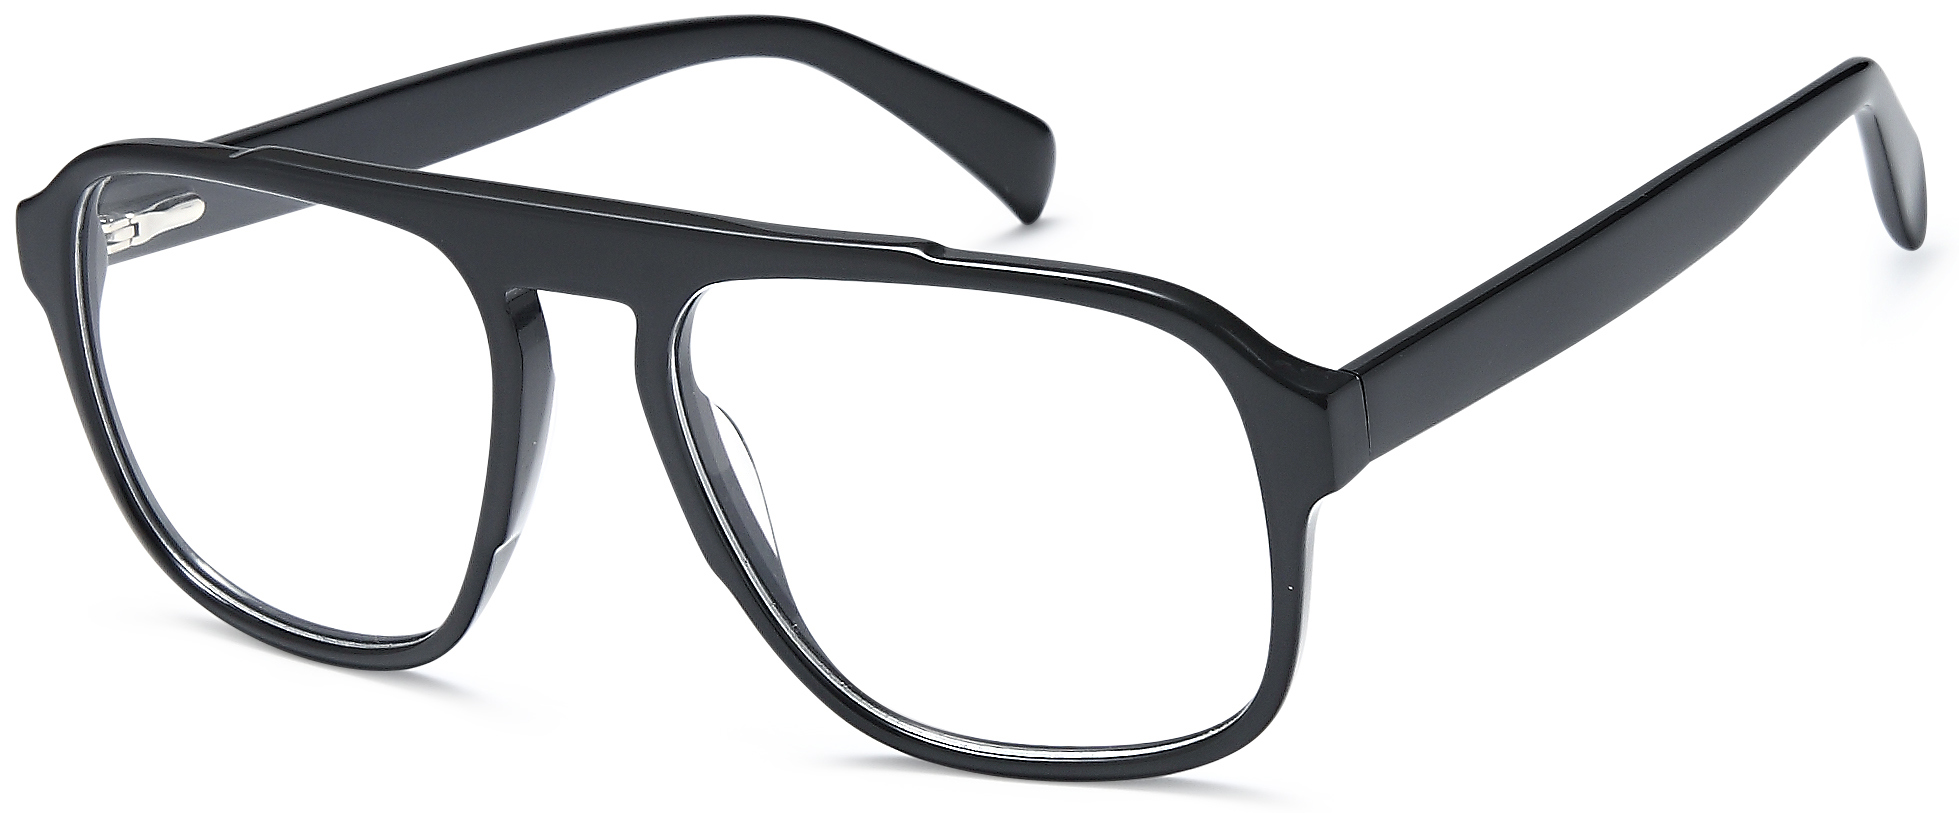 Picture of Candy Shoppe Eyeglasses 21186